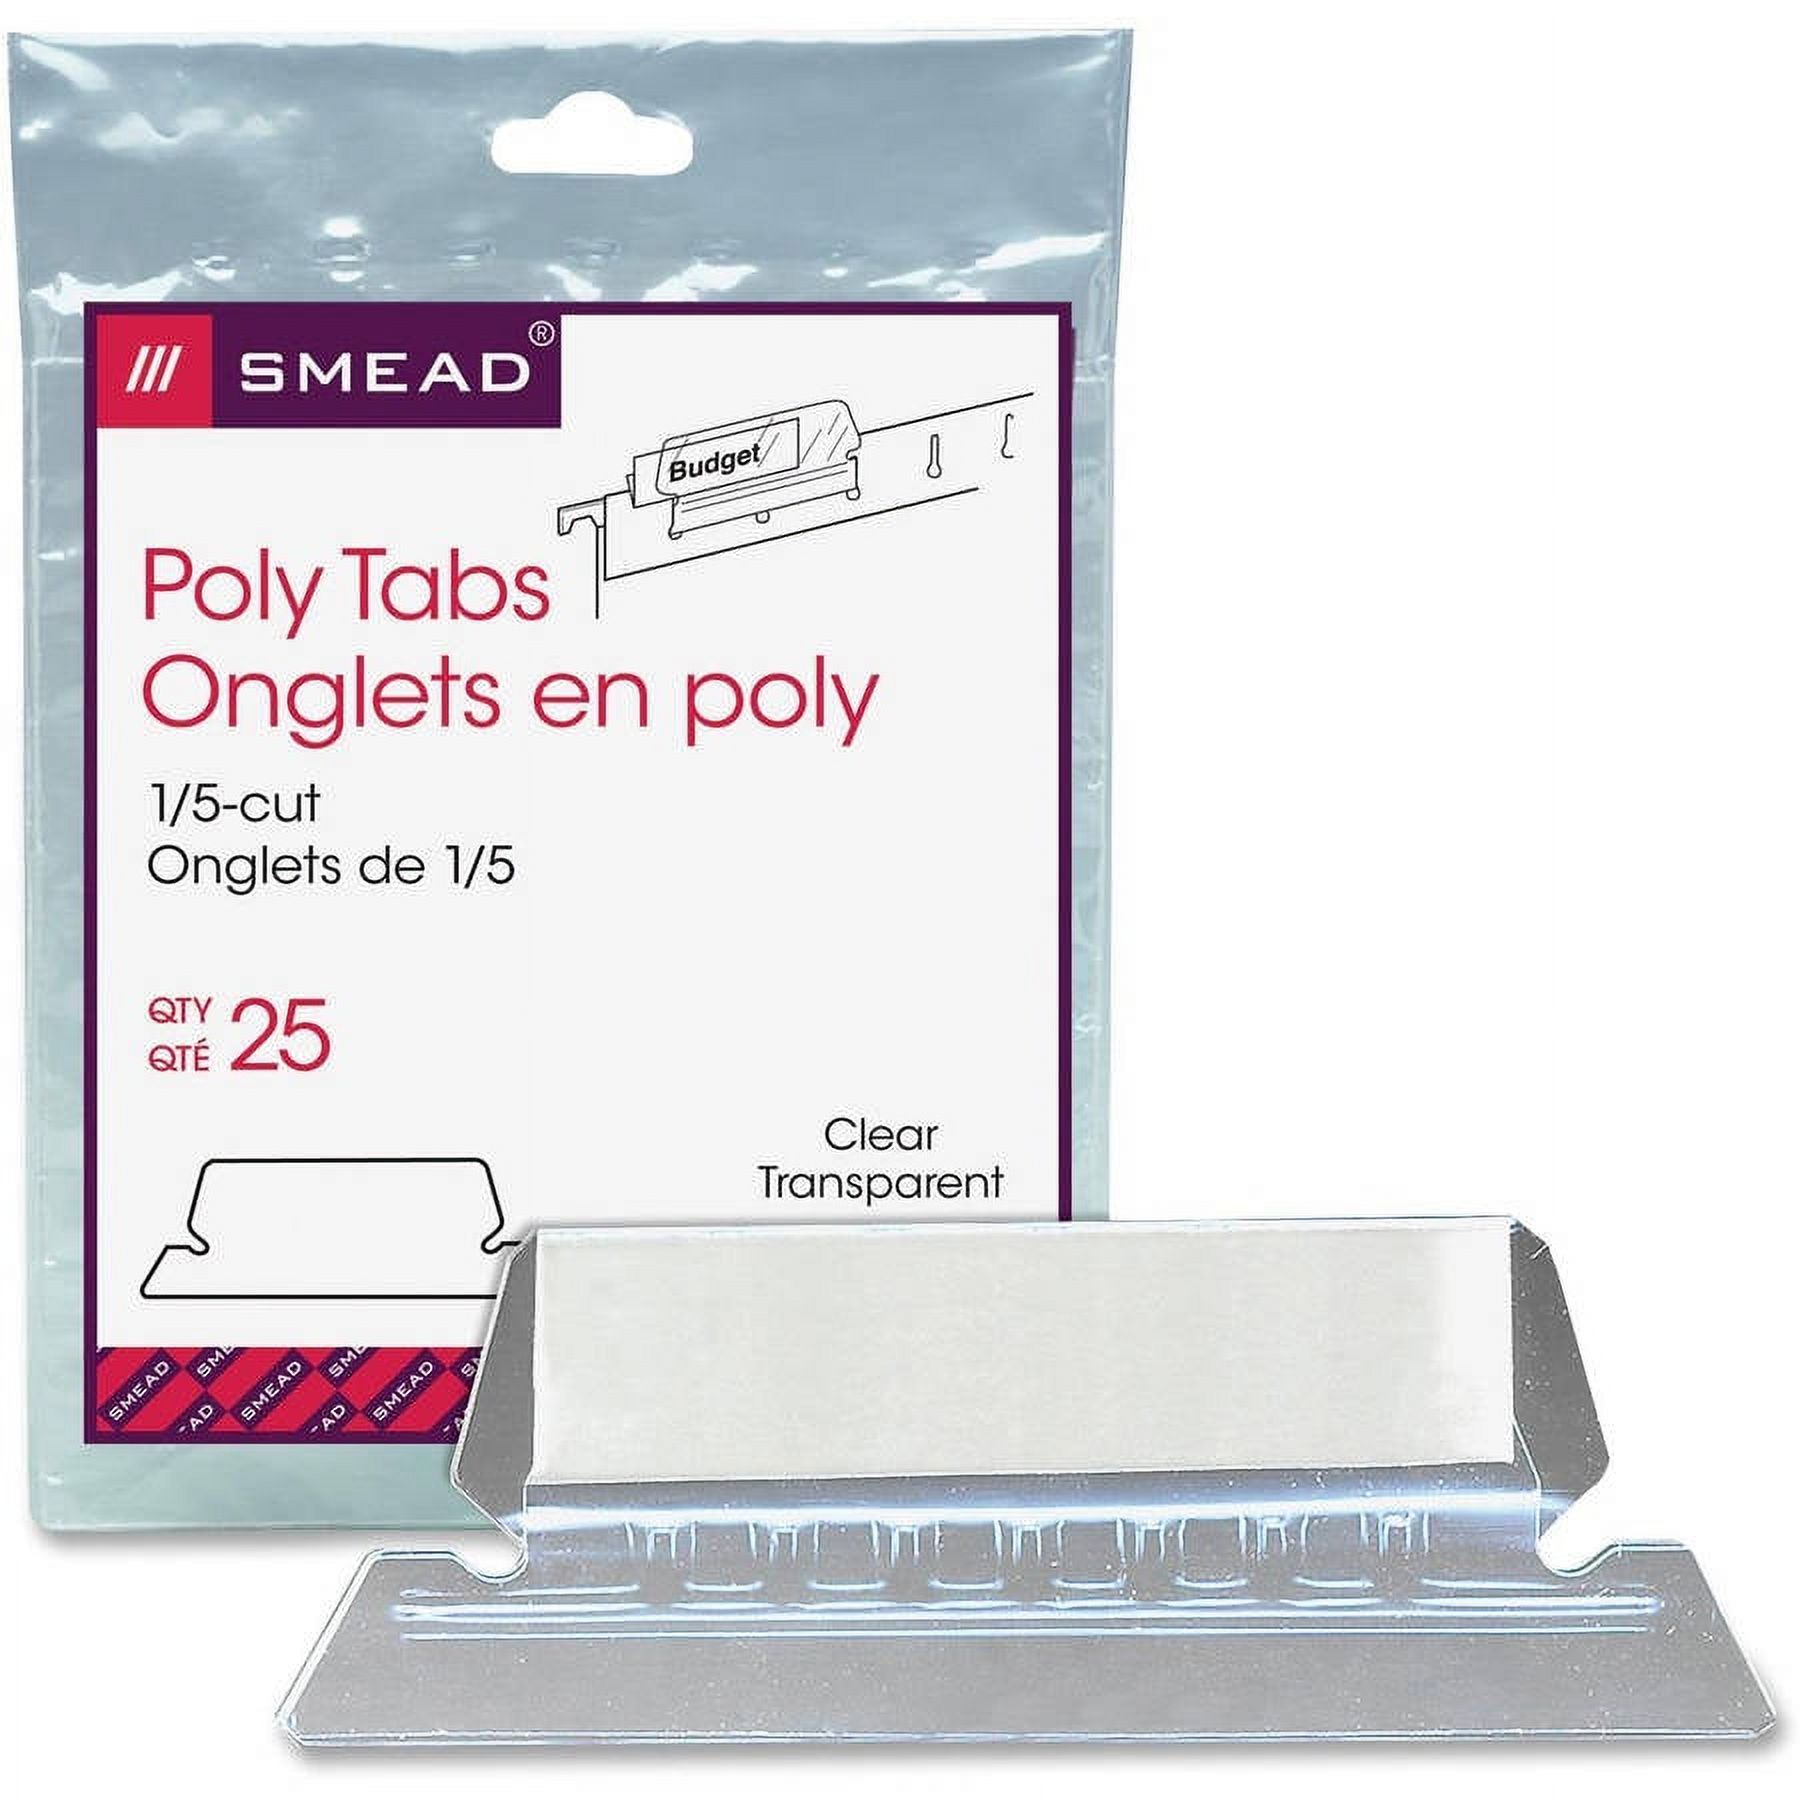 Poly Index Tabs And Inserts For Hanging File Folders, 1/5-Cut Tabs, White/clear, 2.25" Wide, 25/pack | Bundle of 5 Packs - image 1 of 6